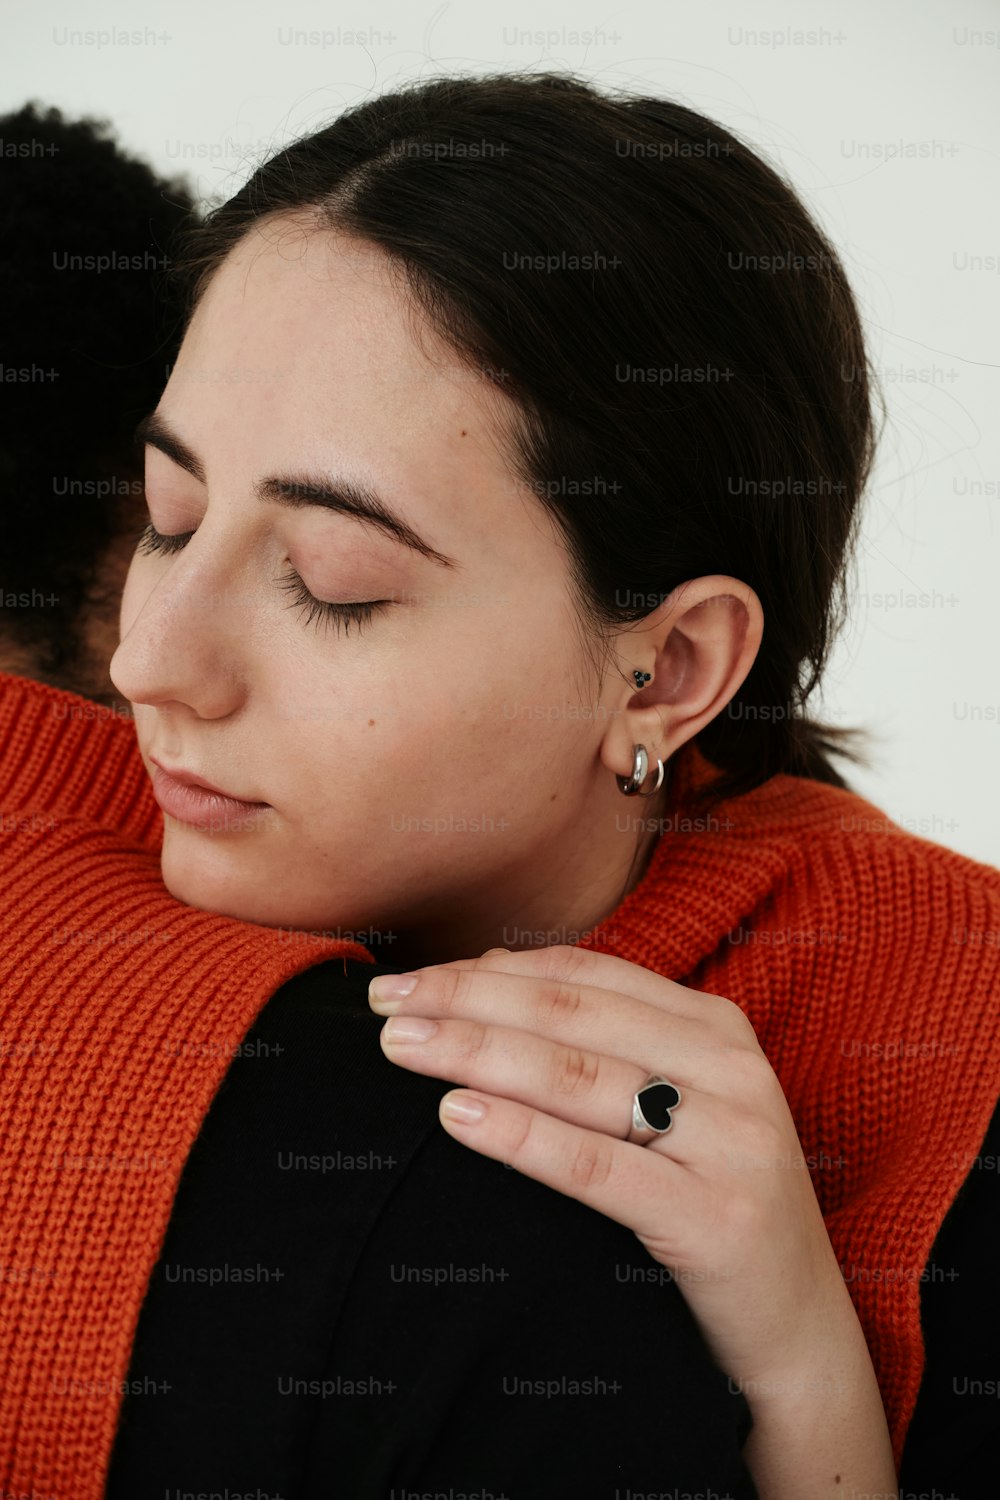 a woman with her eyes closed wearing a red sweater